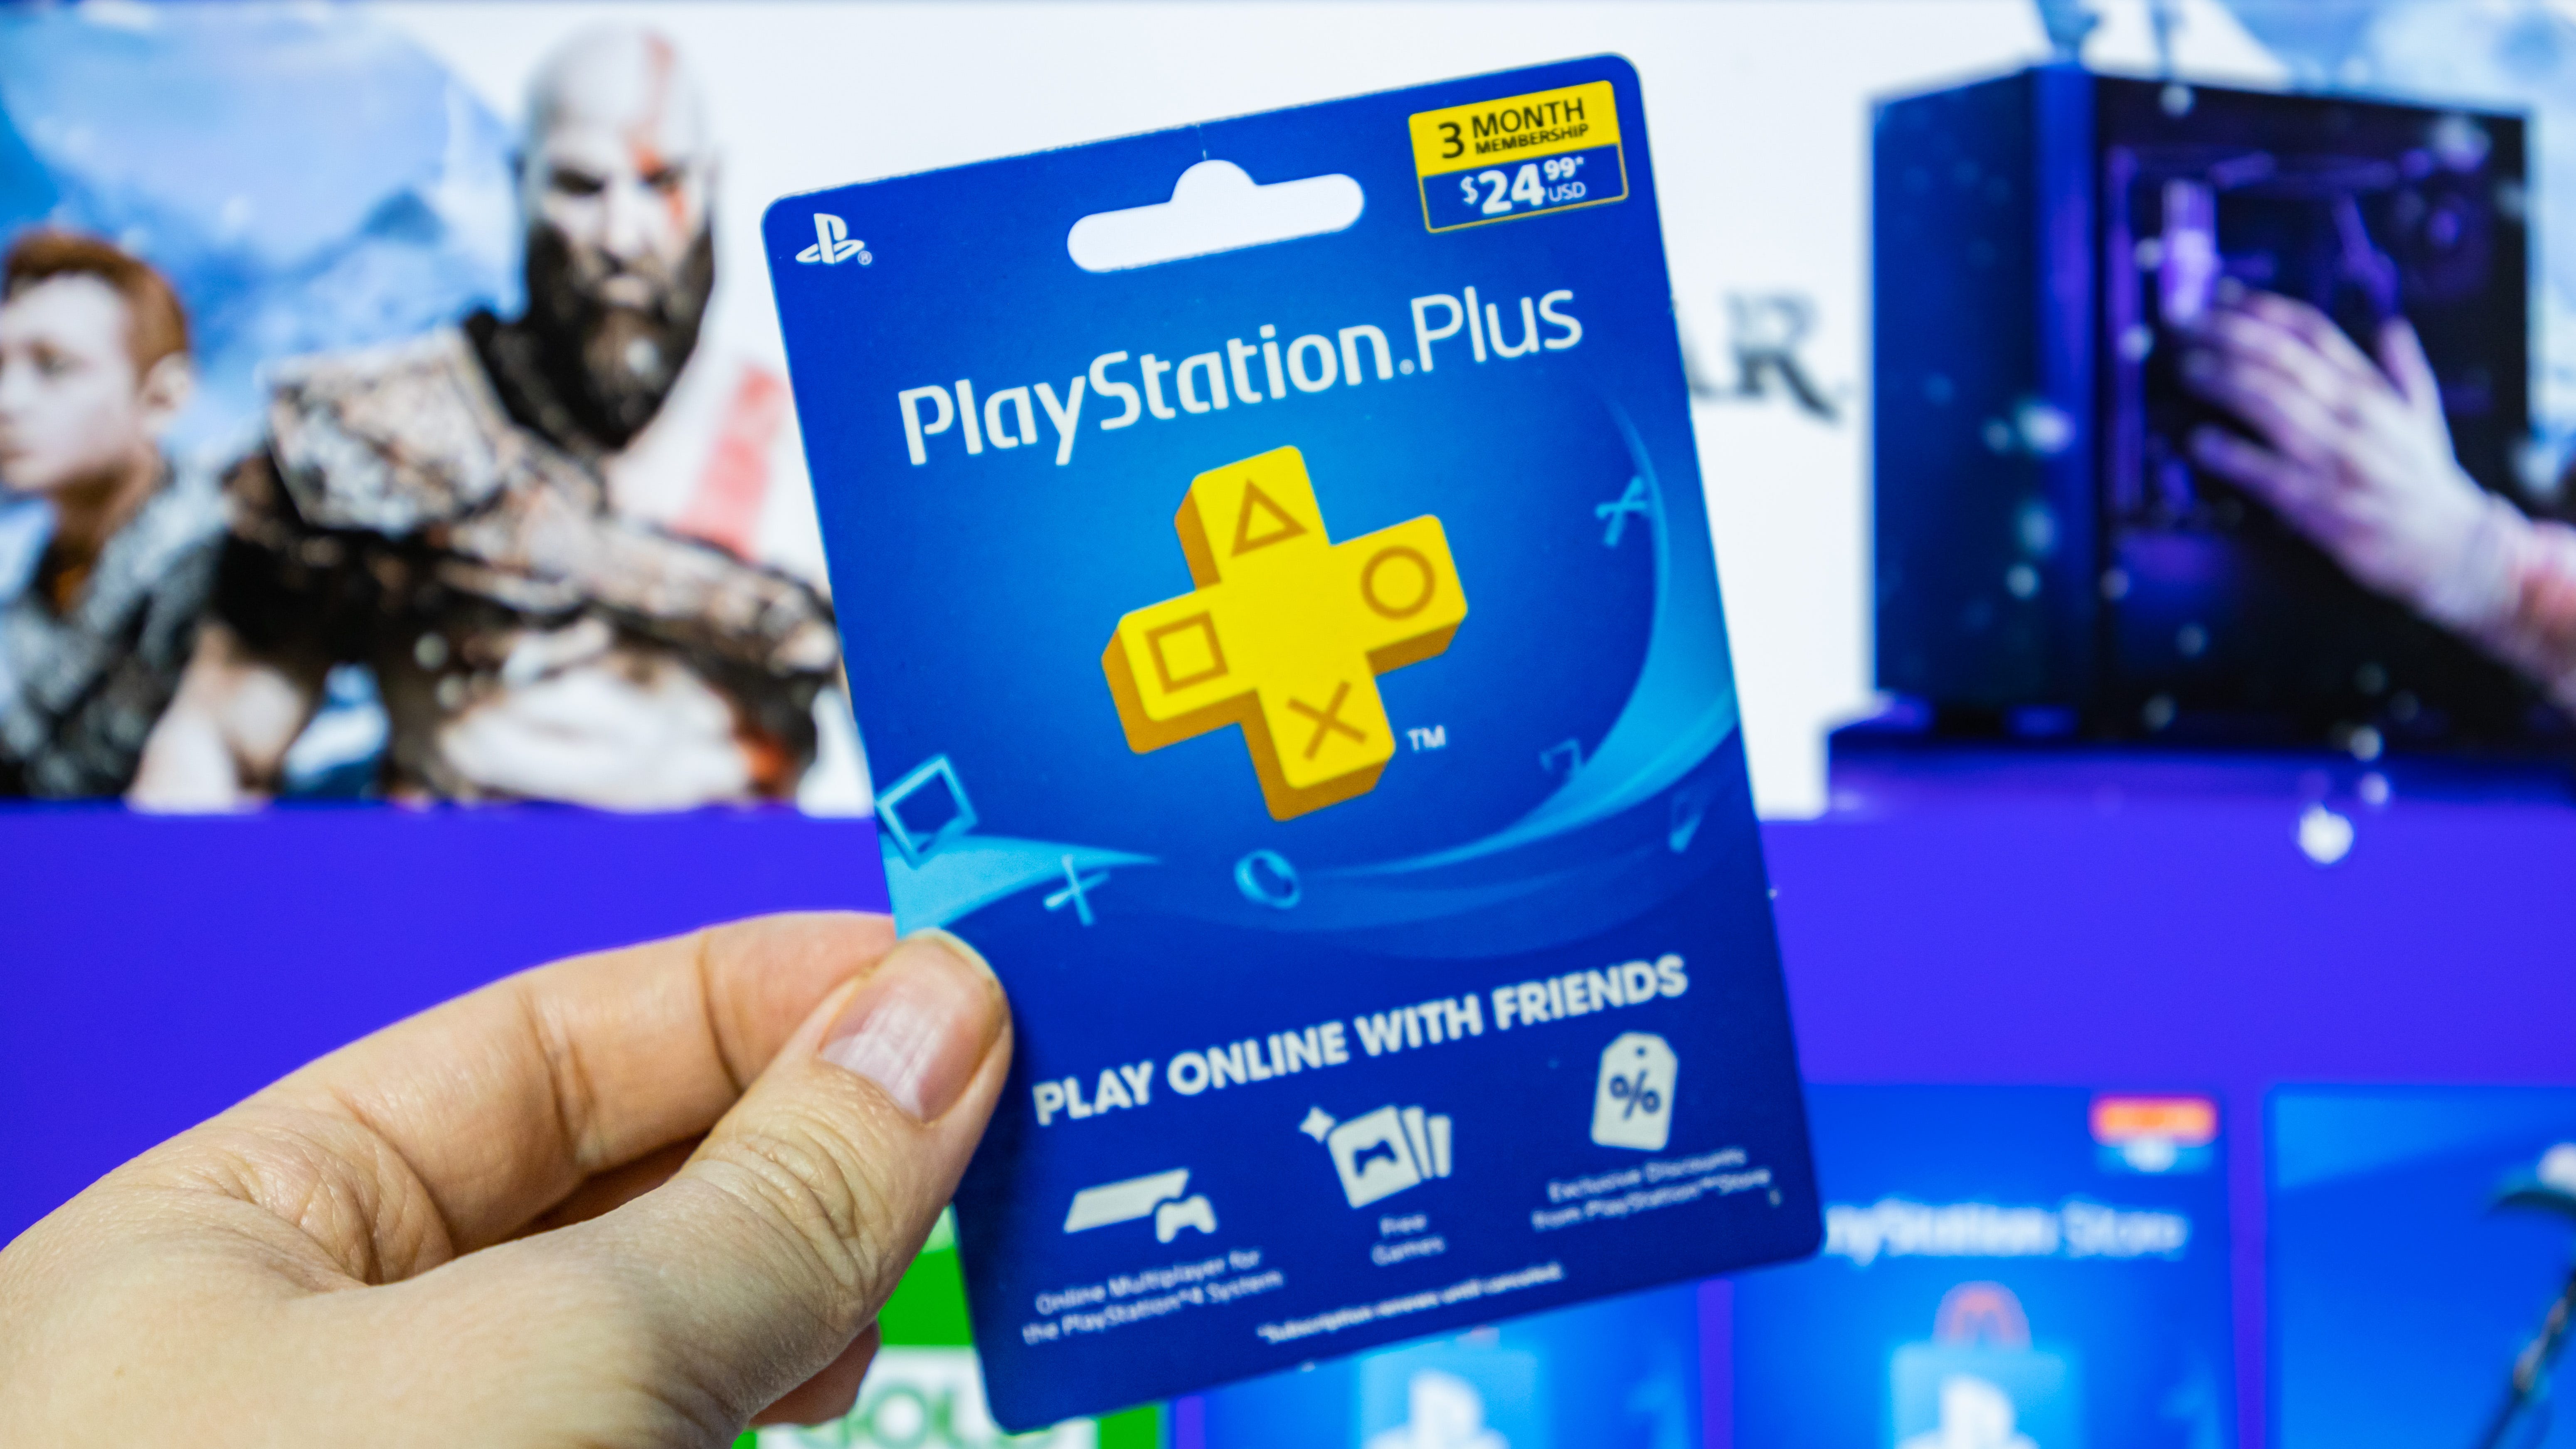 Score a discounted 3-year subscription to PlayStation Plus